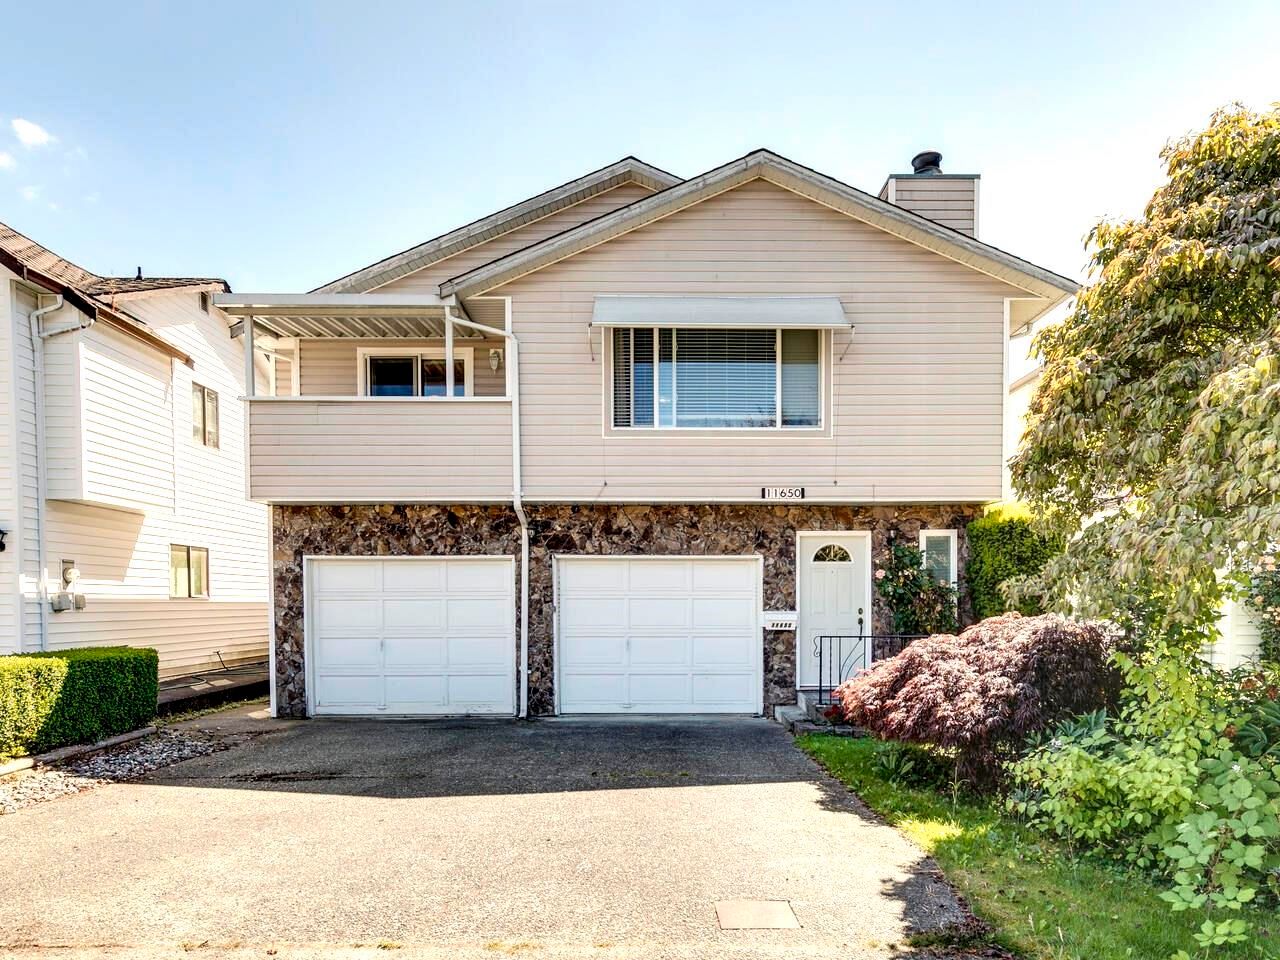 Open House on Sunday, October 16, 2022 1:00PM - 3:00PM
Some lucky Buyer's getting another chance.  Accepted -offer unfortunately collapsed!  This truly is a home that serious Buyers hope to find.  Already one of the more affordable homes for sale in Maple